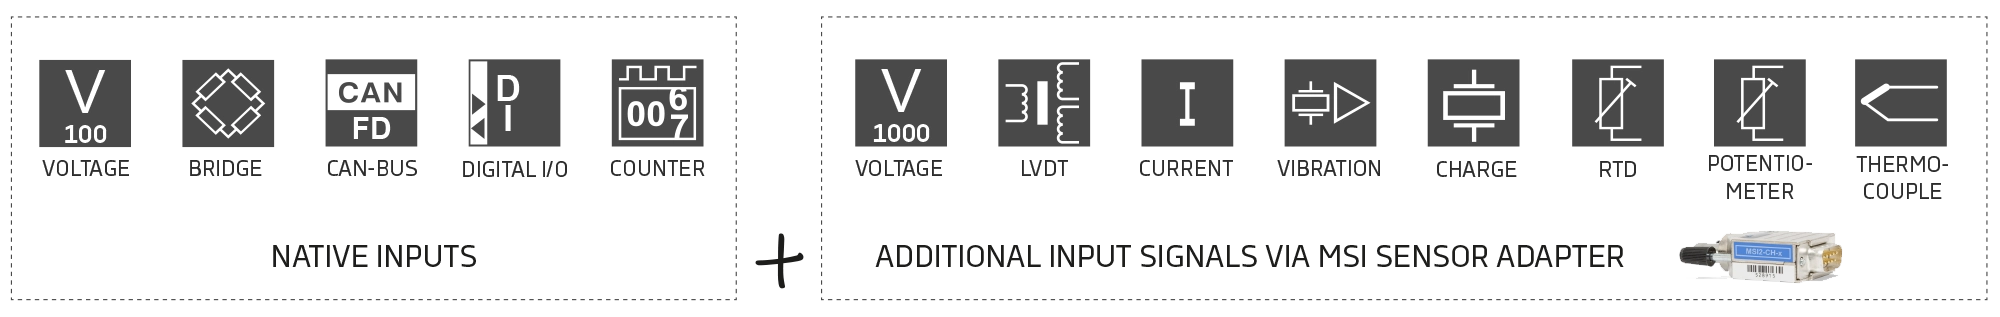 Voltage, bridge, LVDT, current, vibration, charge, thermocouple, CAN-FD